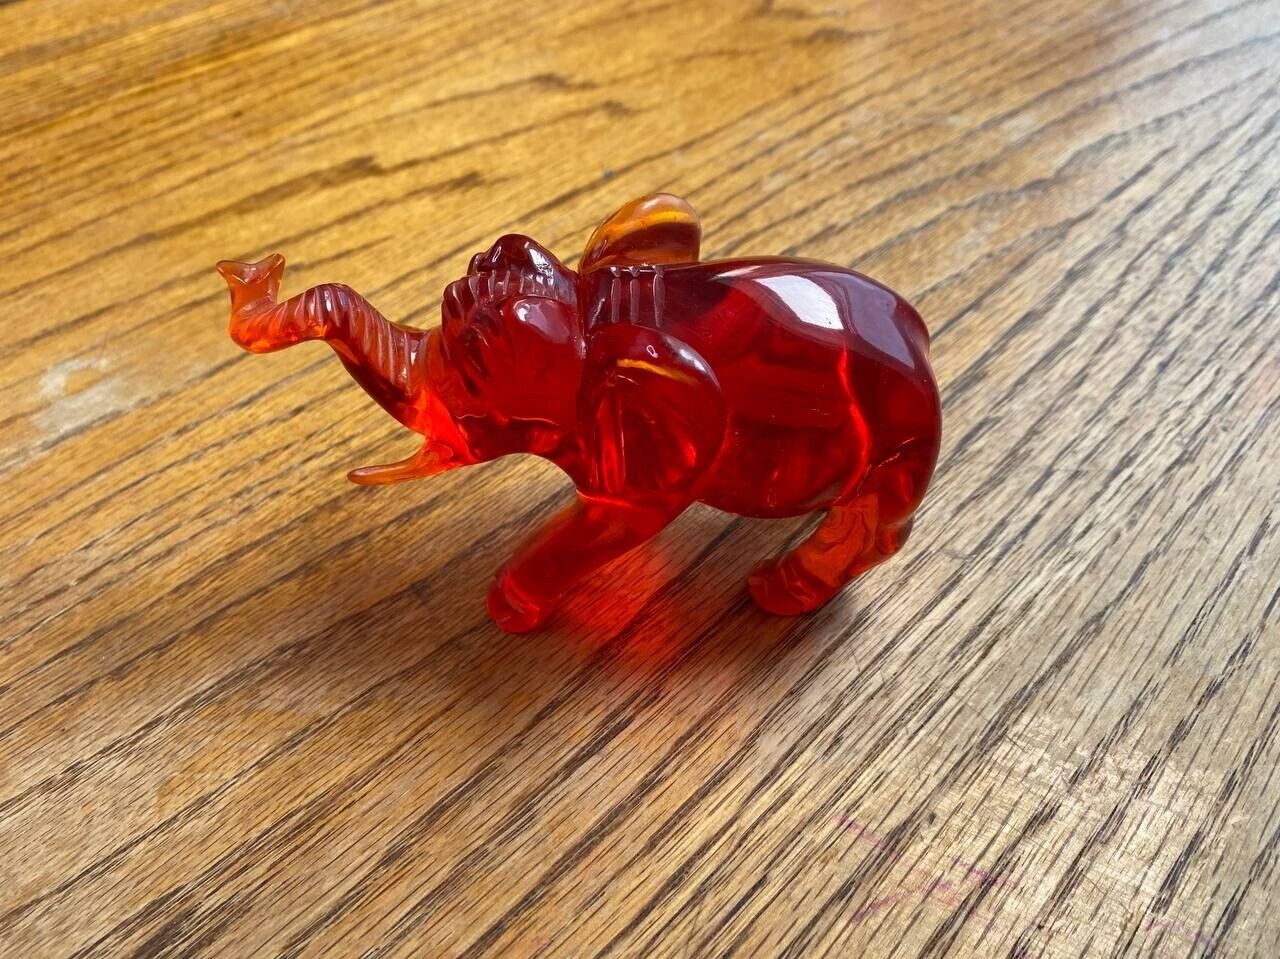 Vintage Carved Elephant Statue Bakelite/Lucite Cherry Red 153 Grams